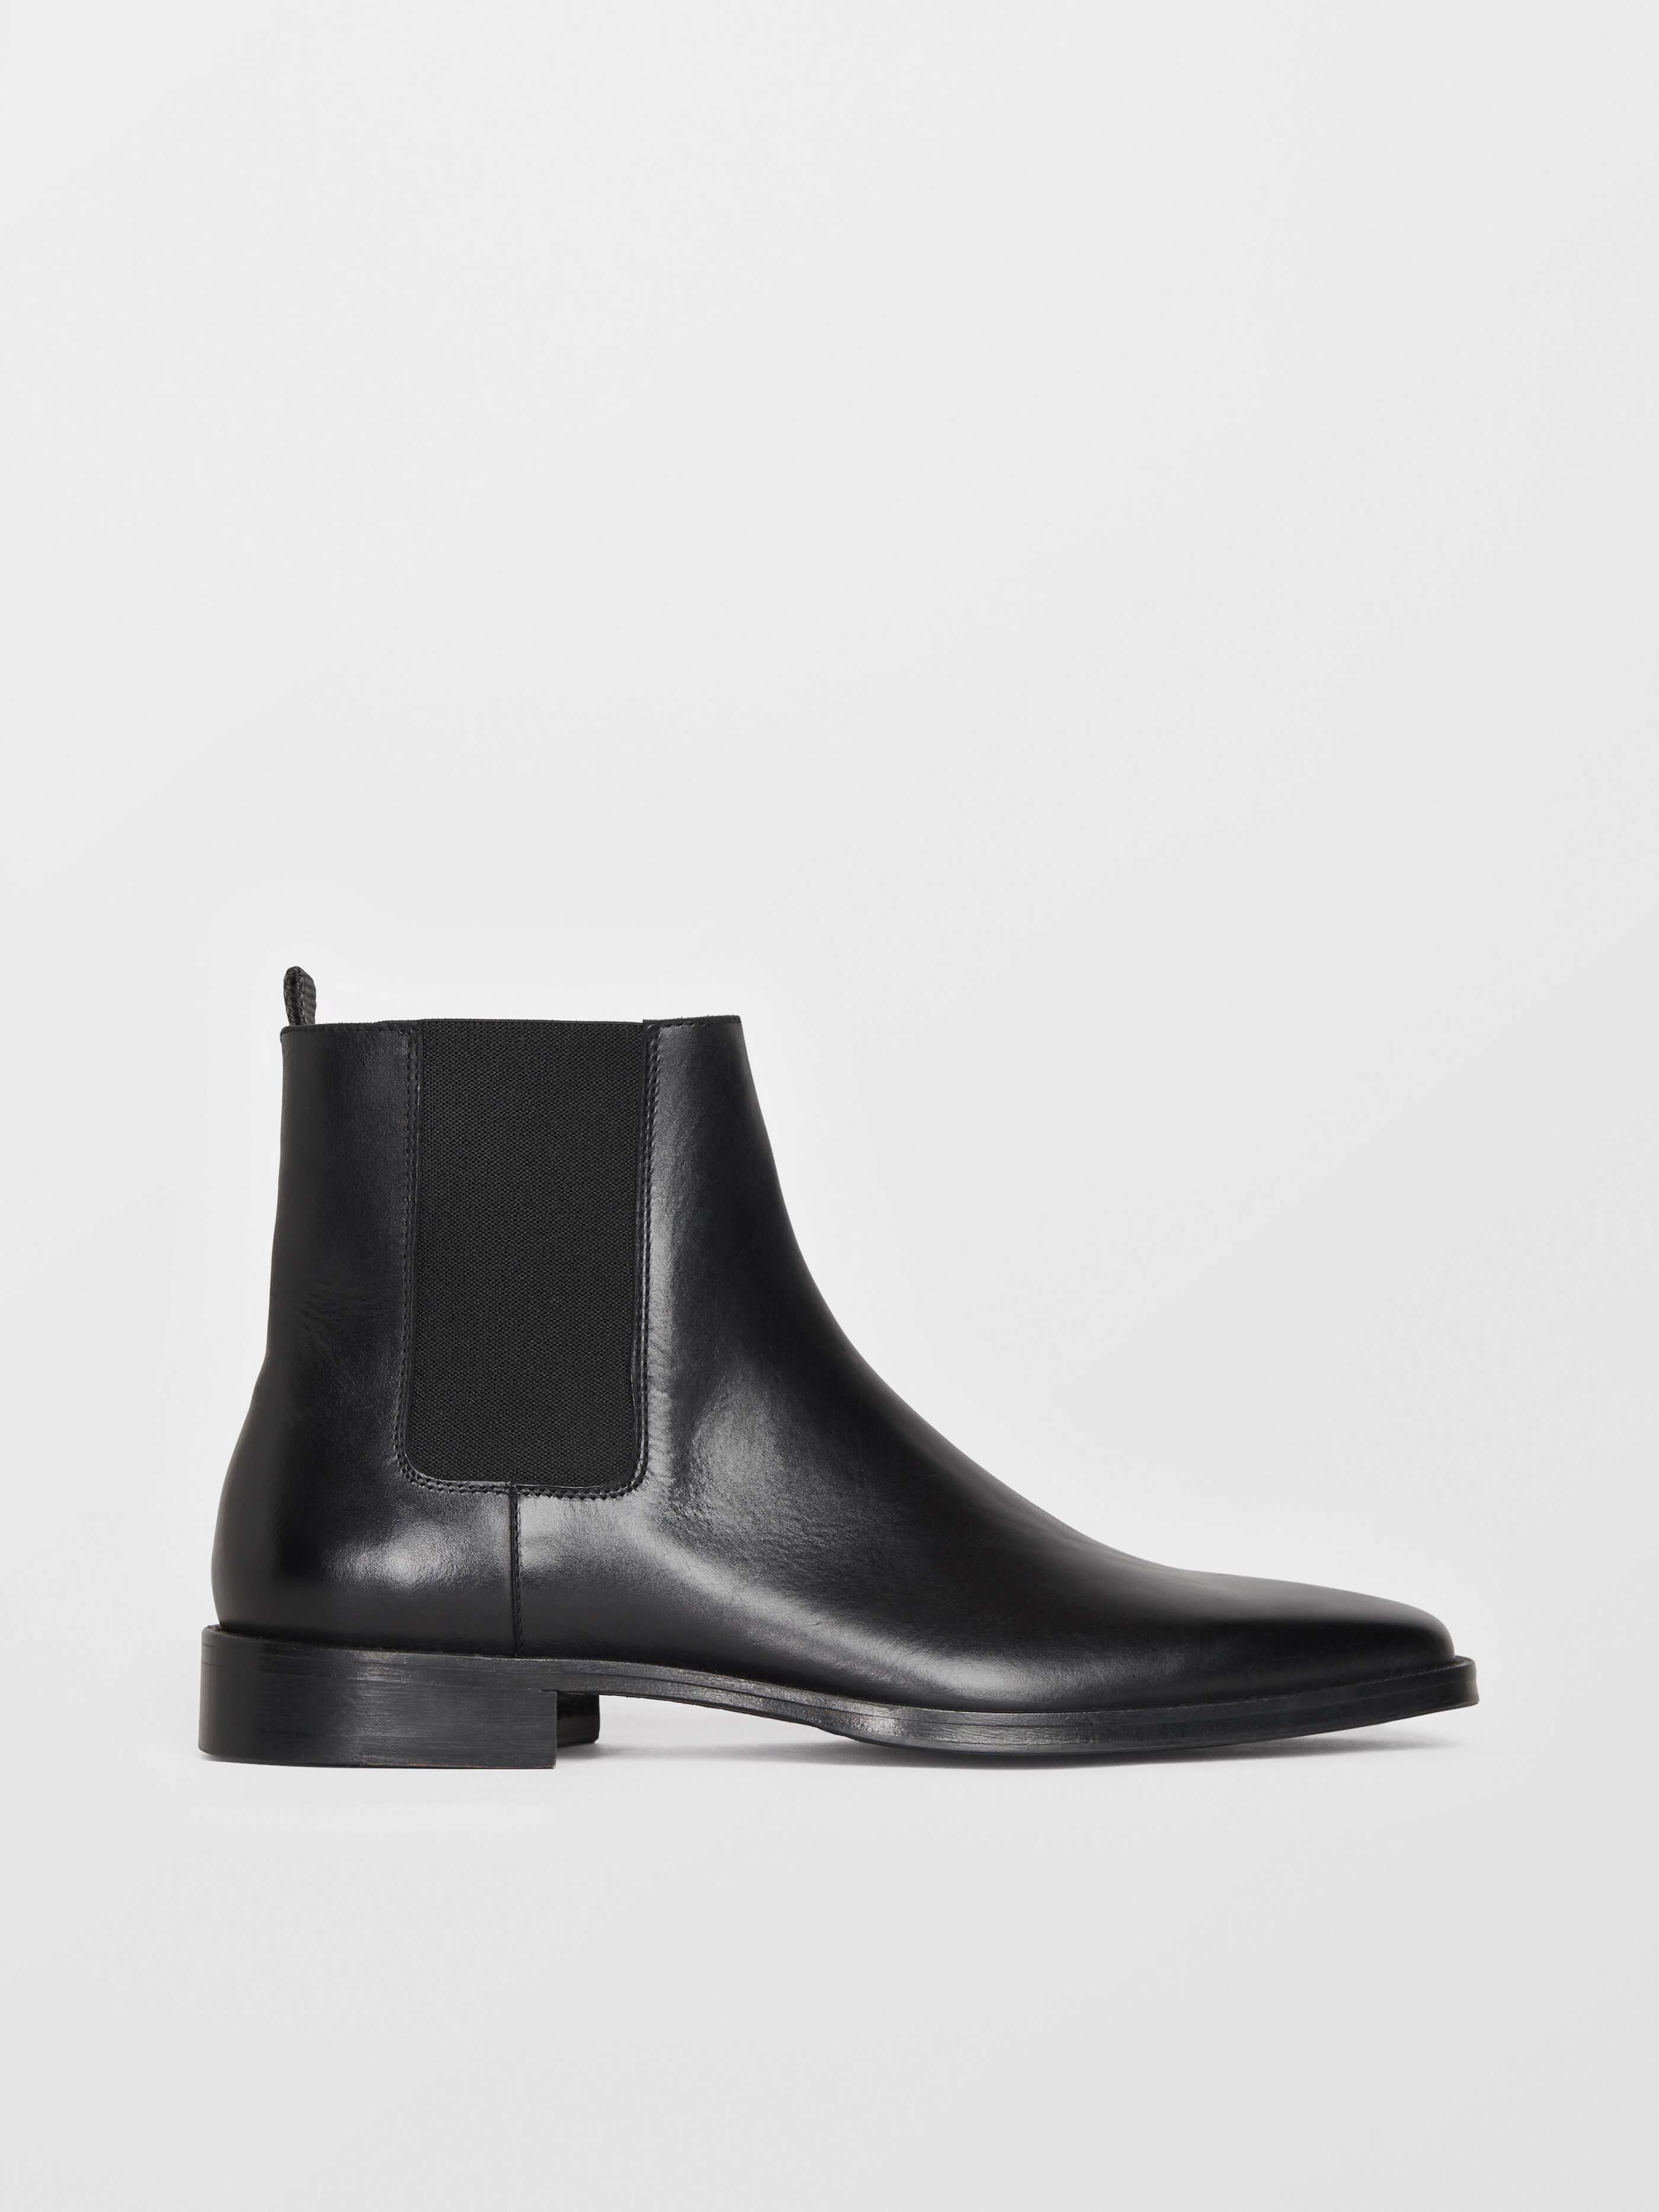 Shoes - Discover this season's men's shoes online at Tiger of Sweden